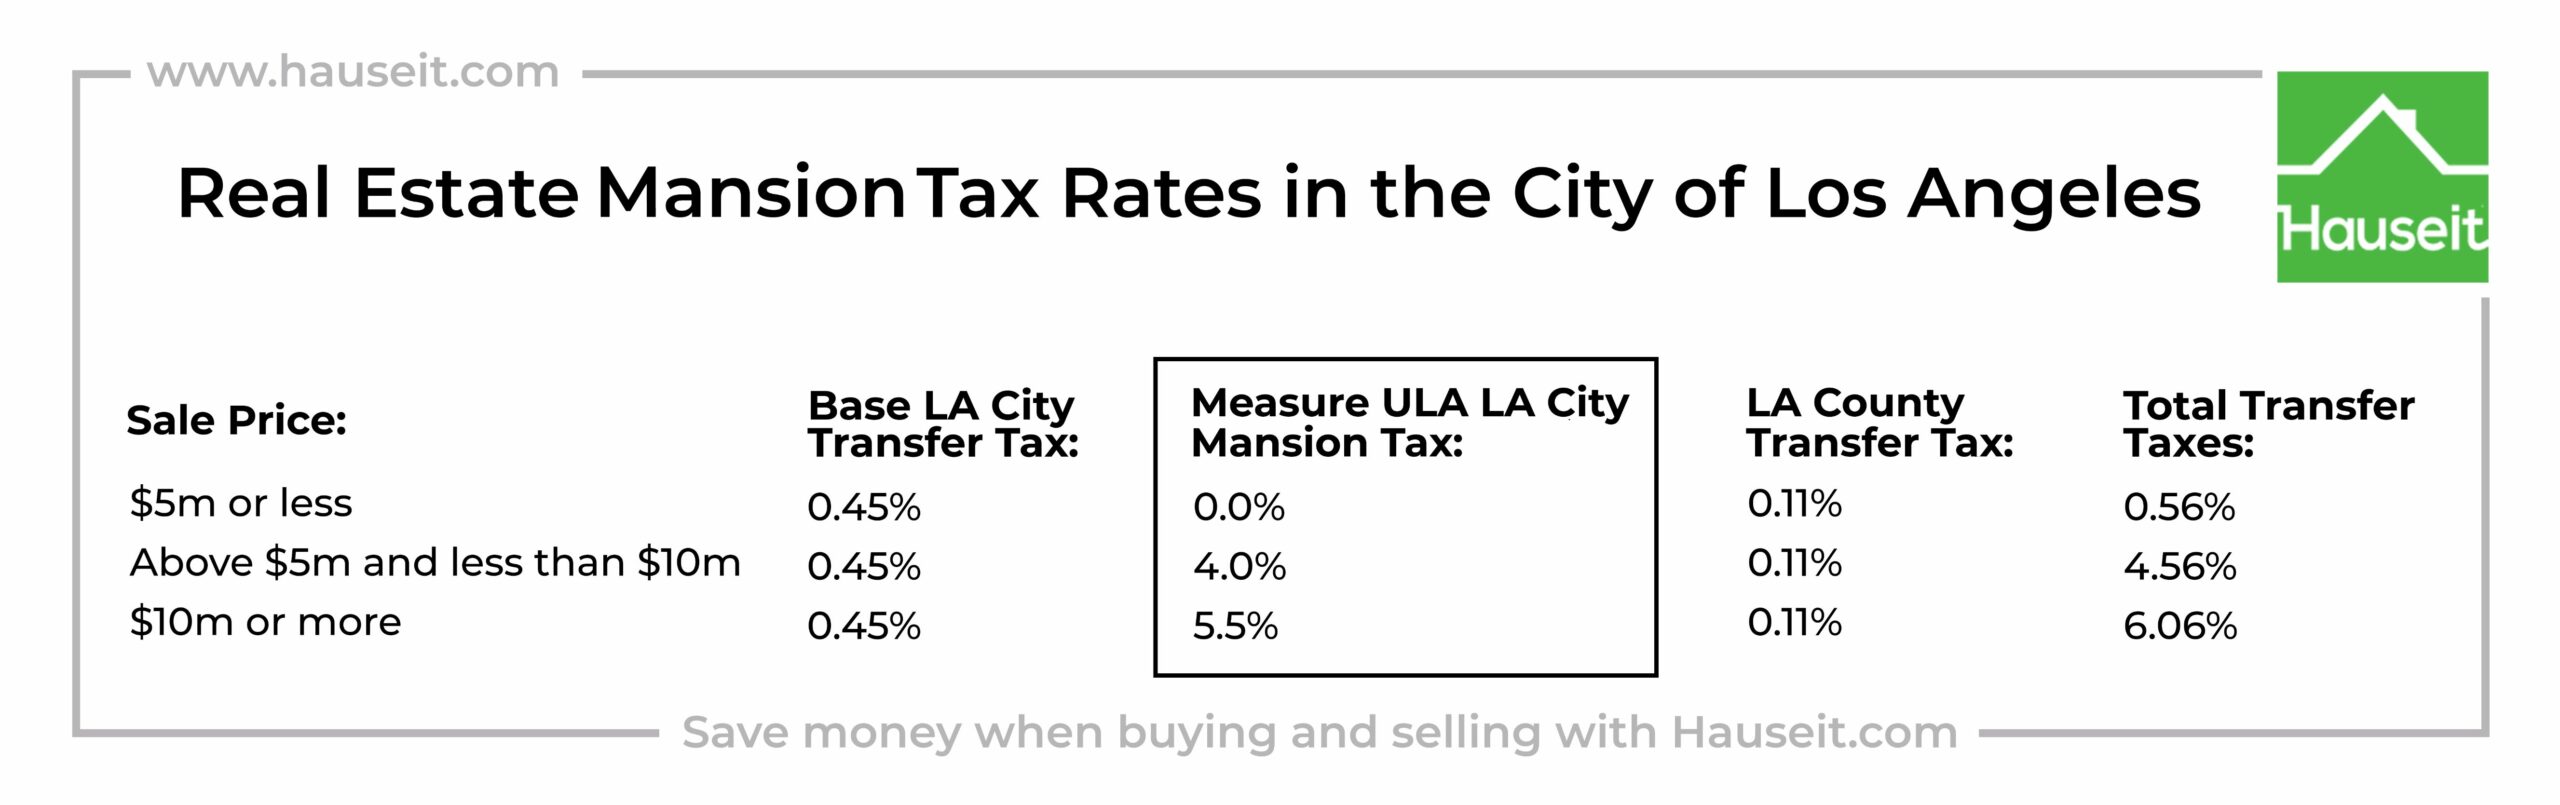 The Mansion Tax in the City of Los Angeles is 4% for homes priced above $5m and less than $10m and 5.5% for homes of $10m or more.